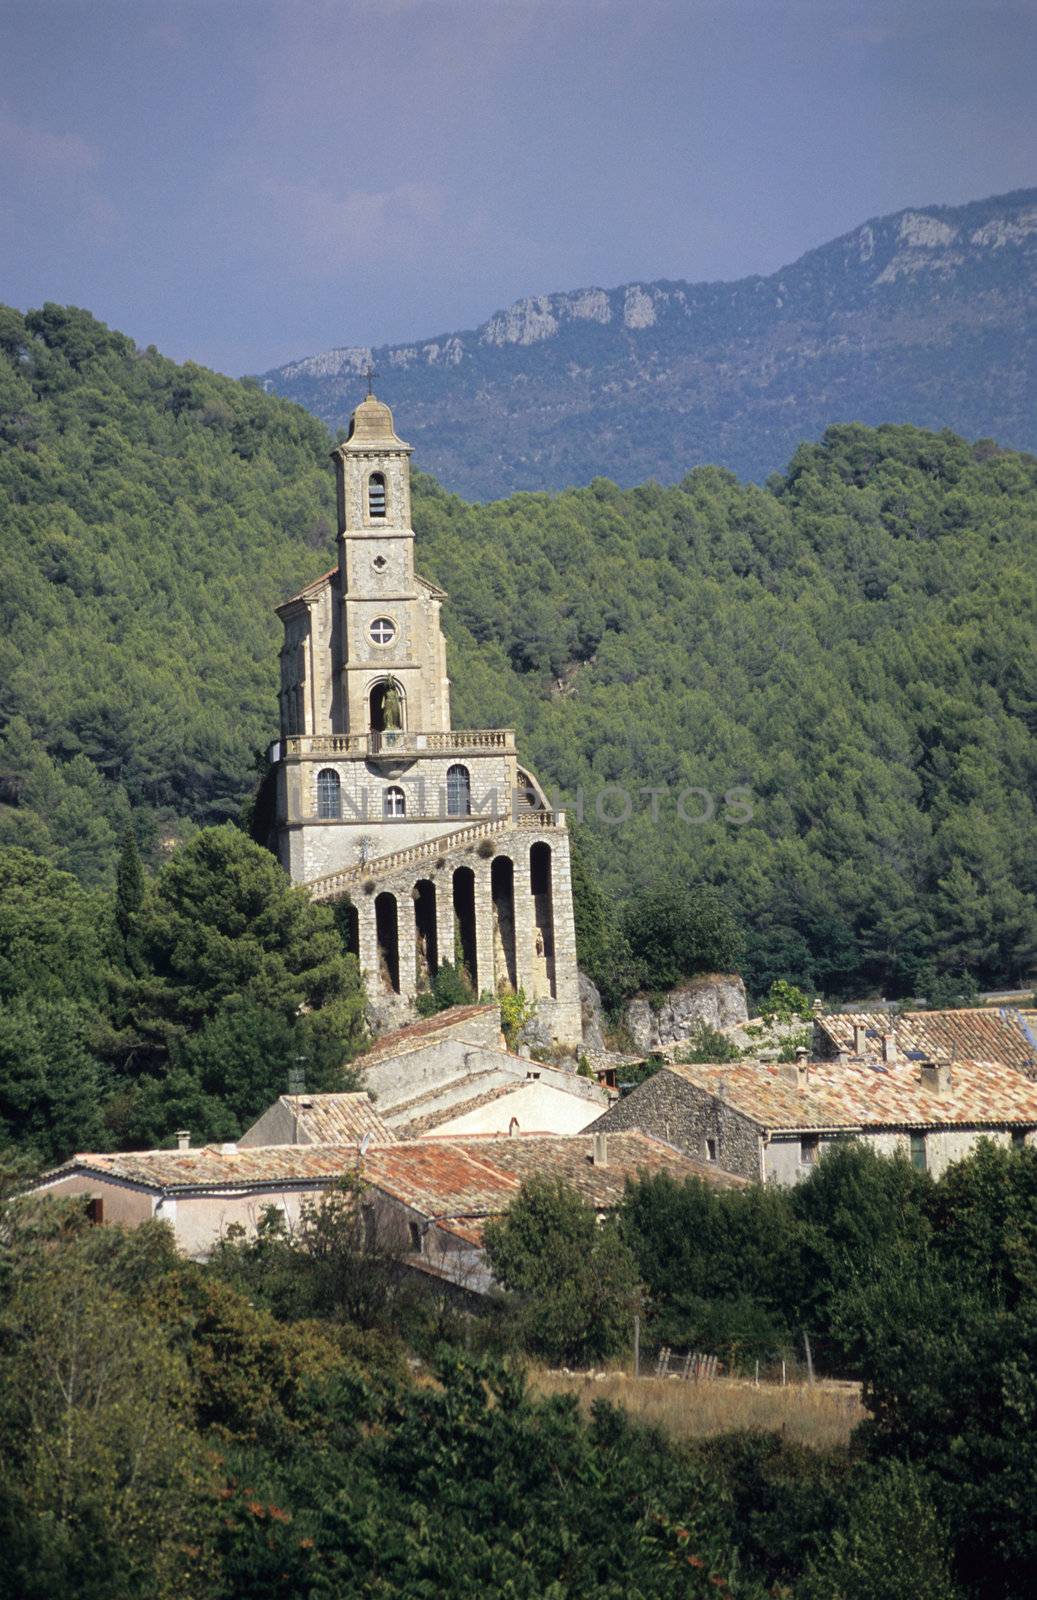 A hilltop church in a tiny village in the mountains of Southern France.